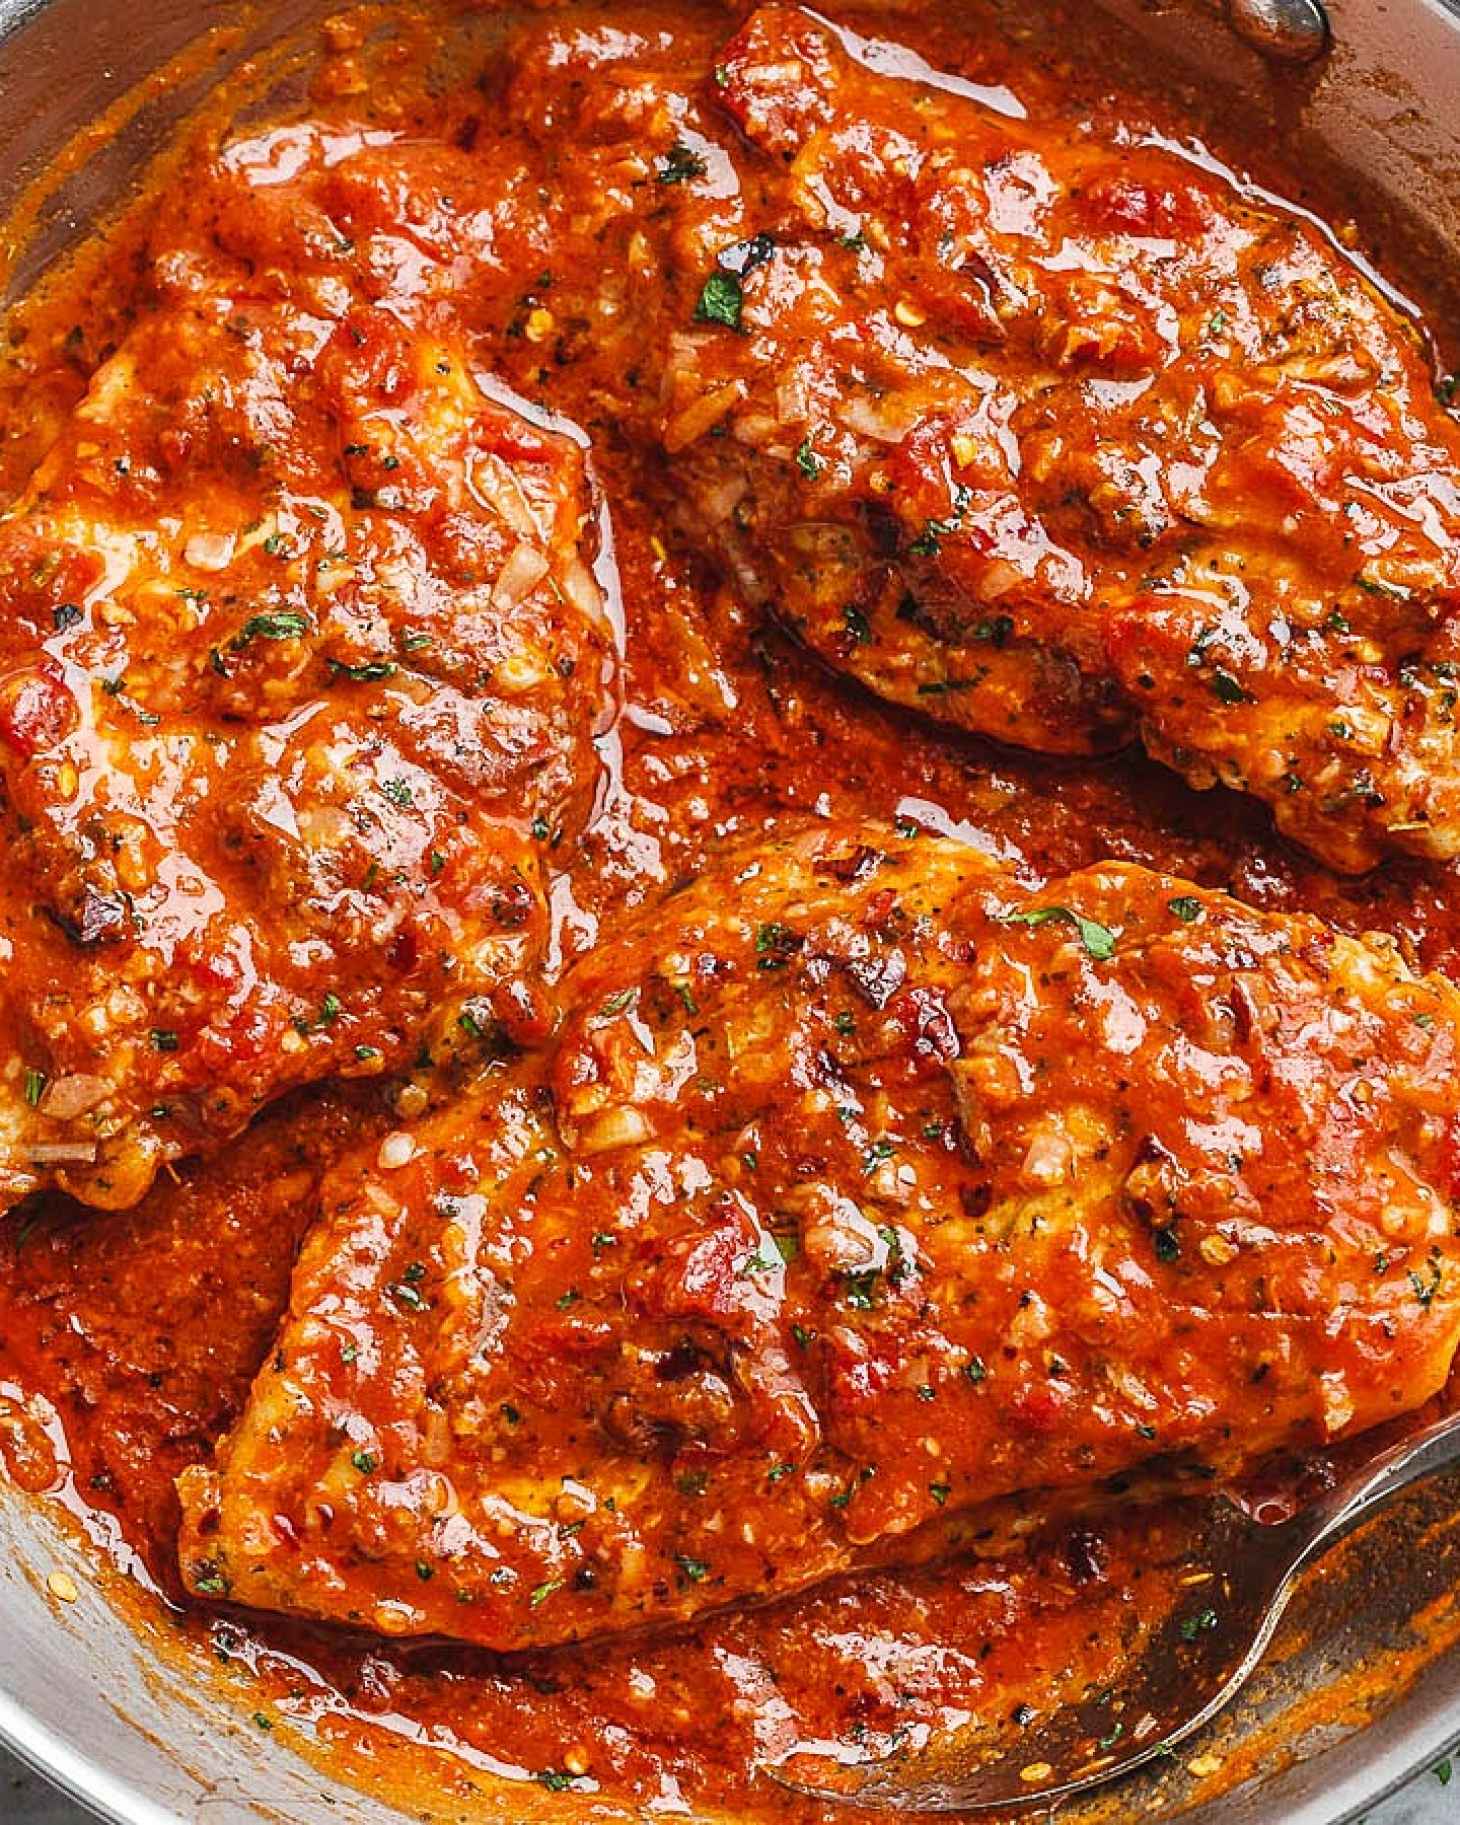 Skillet Chicken Recipes: 20 Quick and Easy Skillet Chicken Recipes for